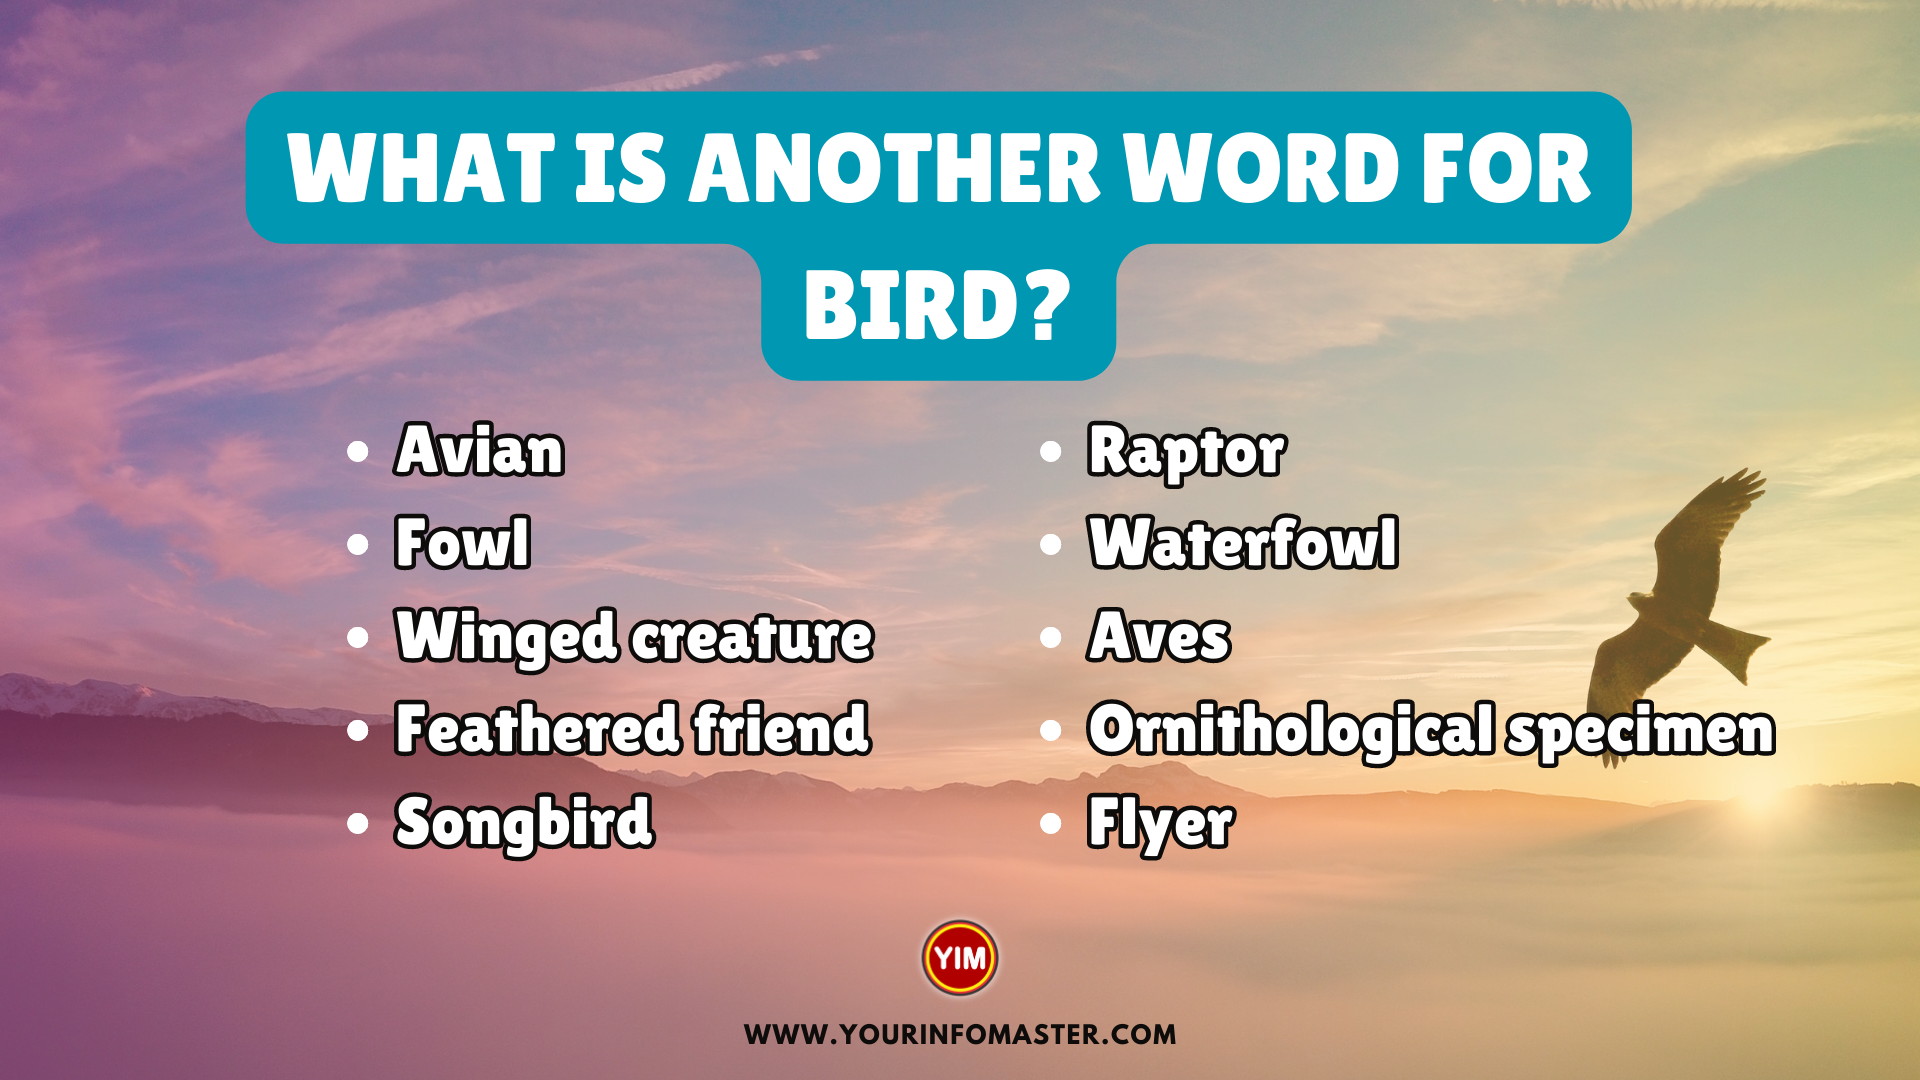 What is another word for Bird (1)